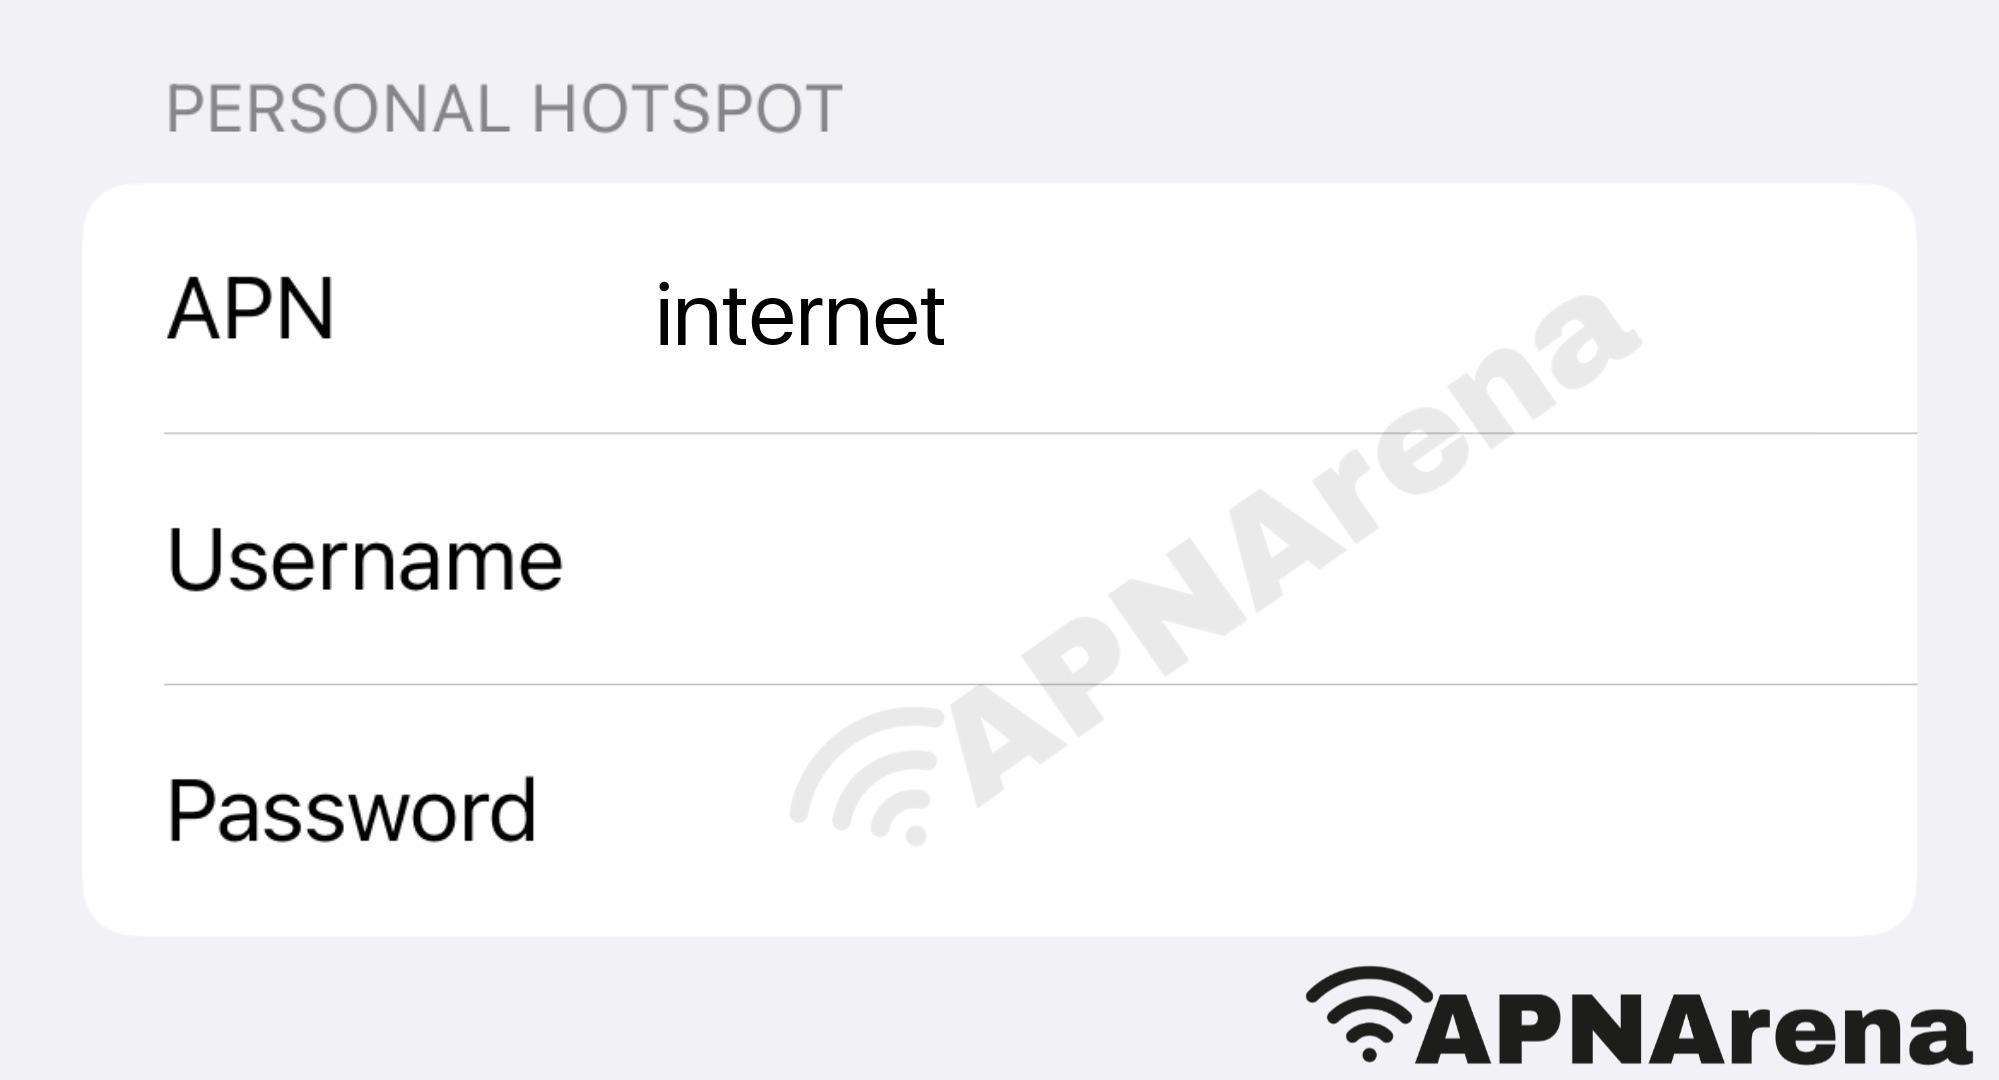 Airtel Niger Personal Hotspot Settings for iPhone